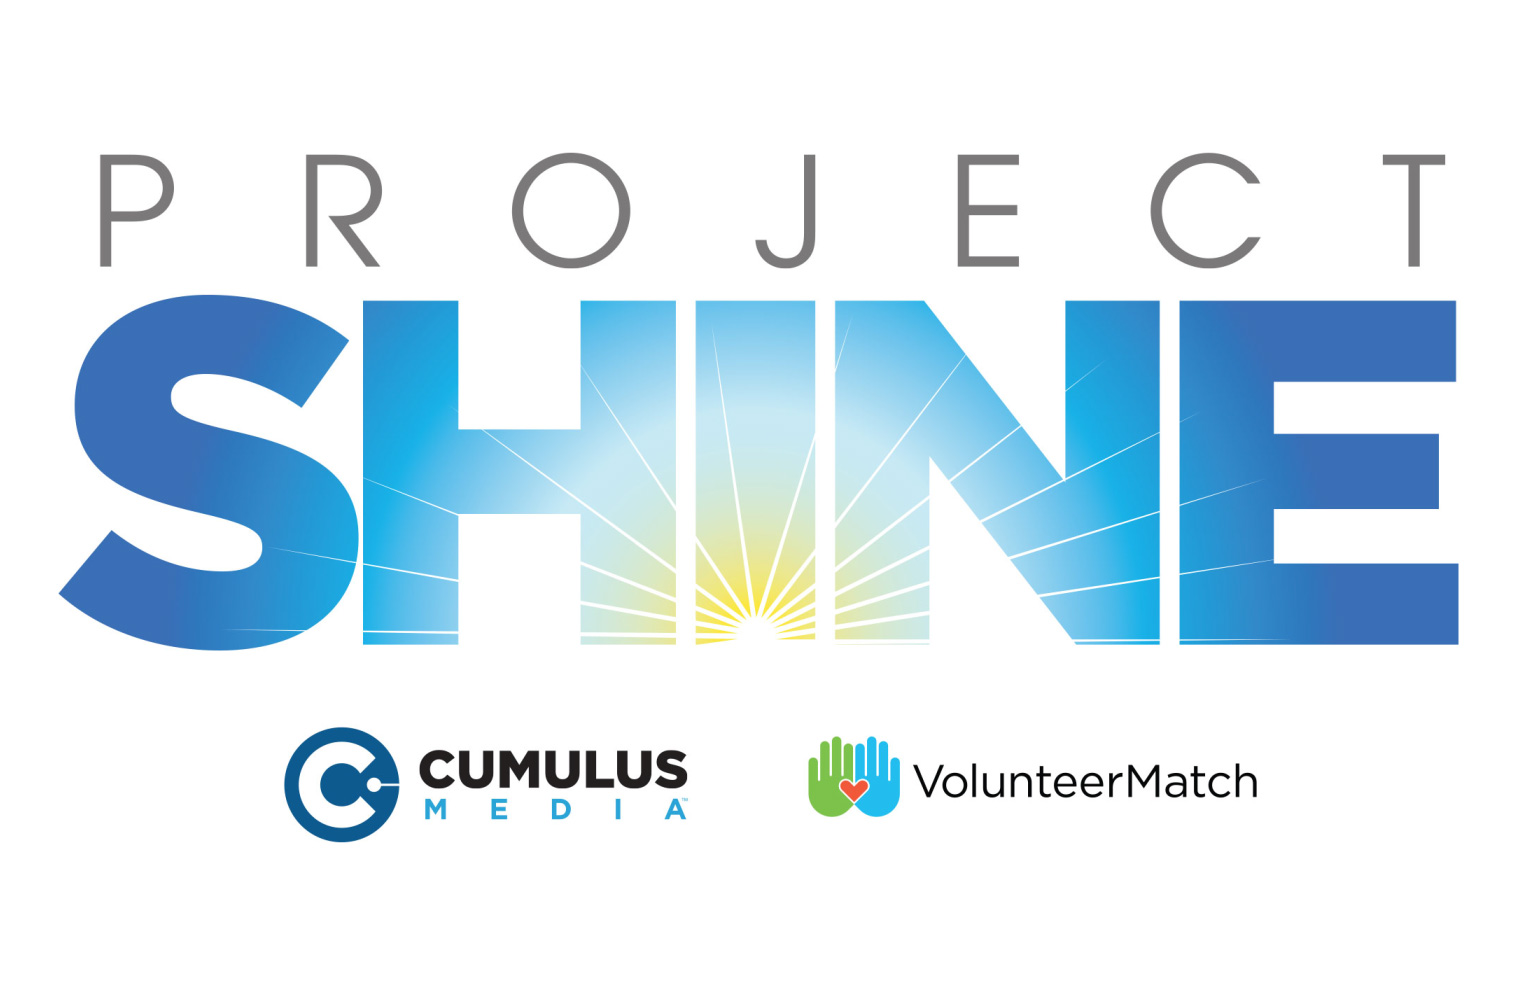 What is Project Shine?